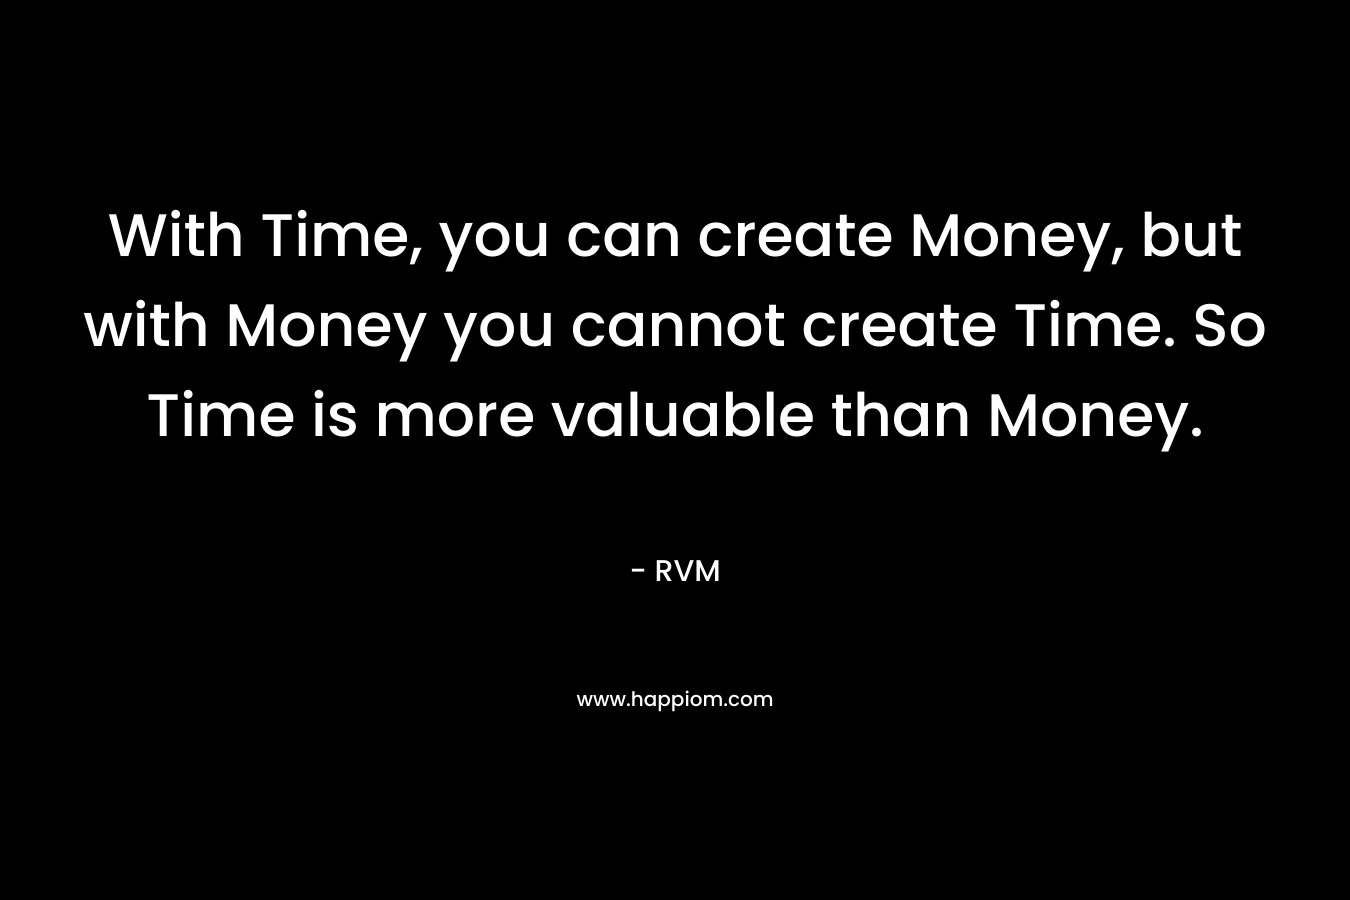 With Time, you can create Money, but with Money you cannot create Time. So Time is more valuable than Money.